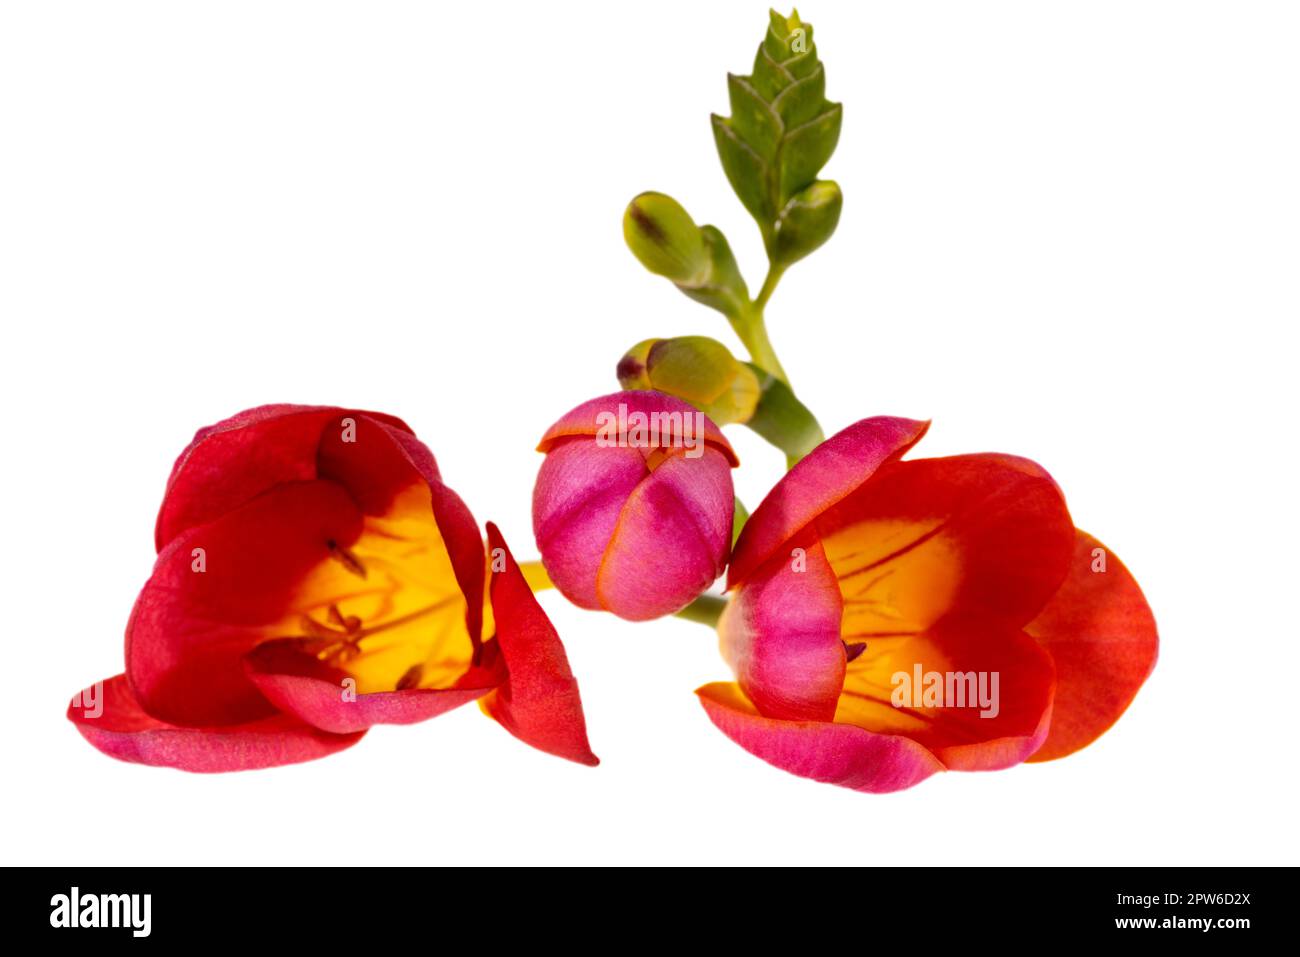 Single stem of a red flower freesia isolated on white background, close up Stock Photo